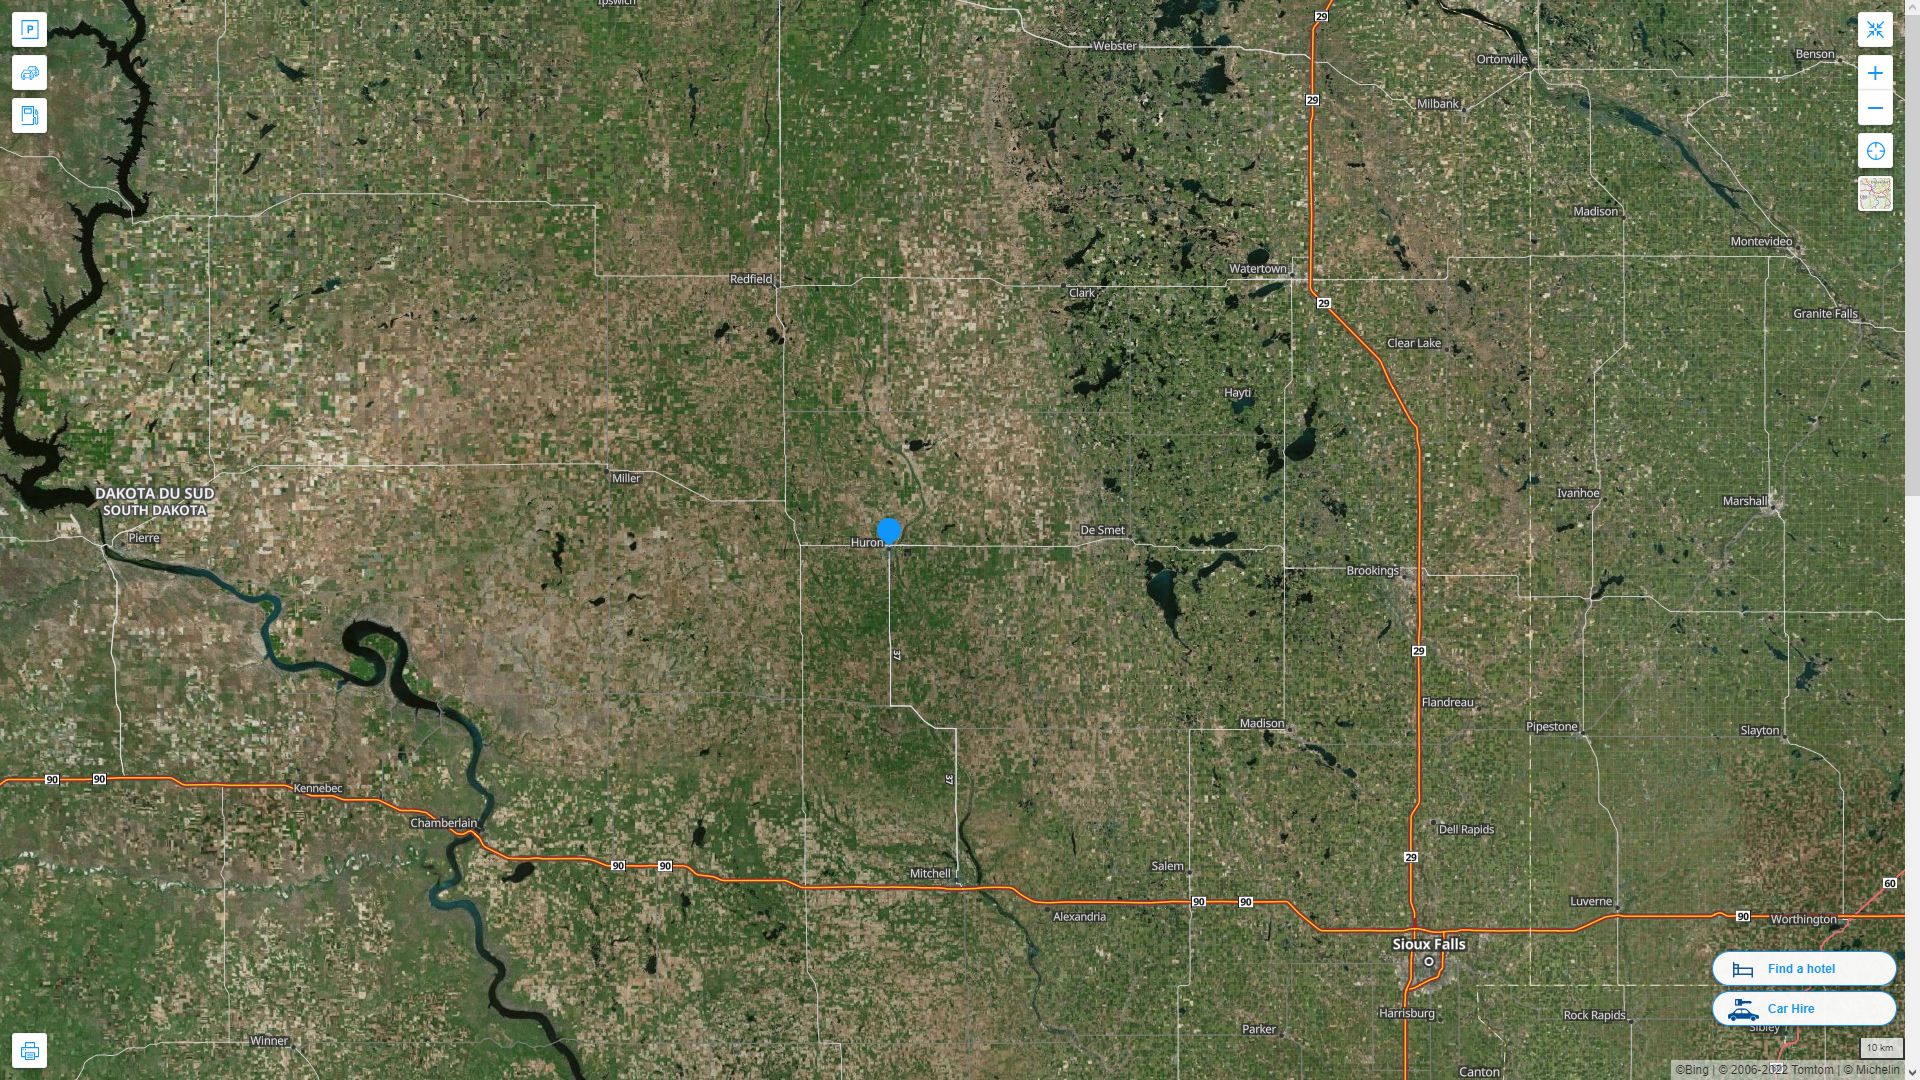 Huron South Dakota Highway and Road Map with Satellite View